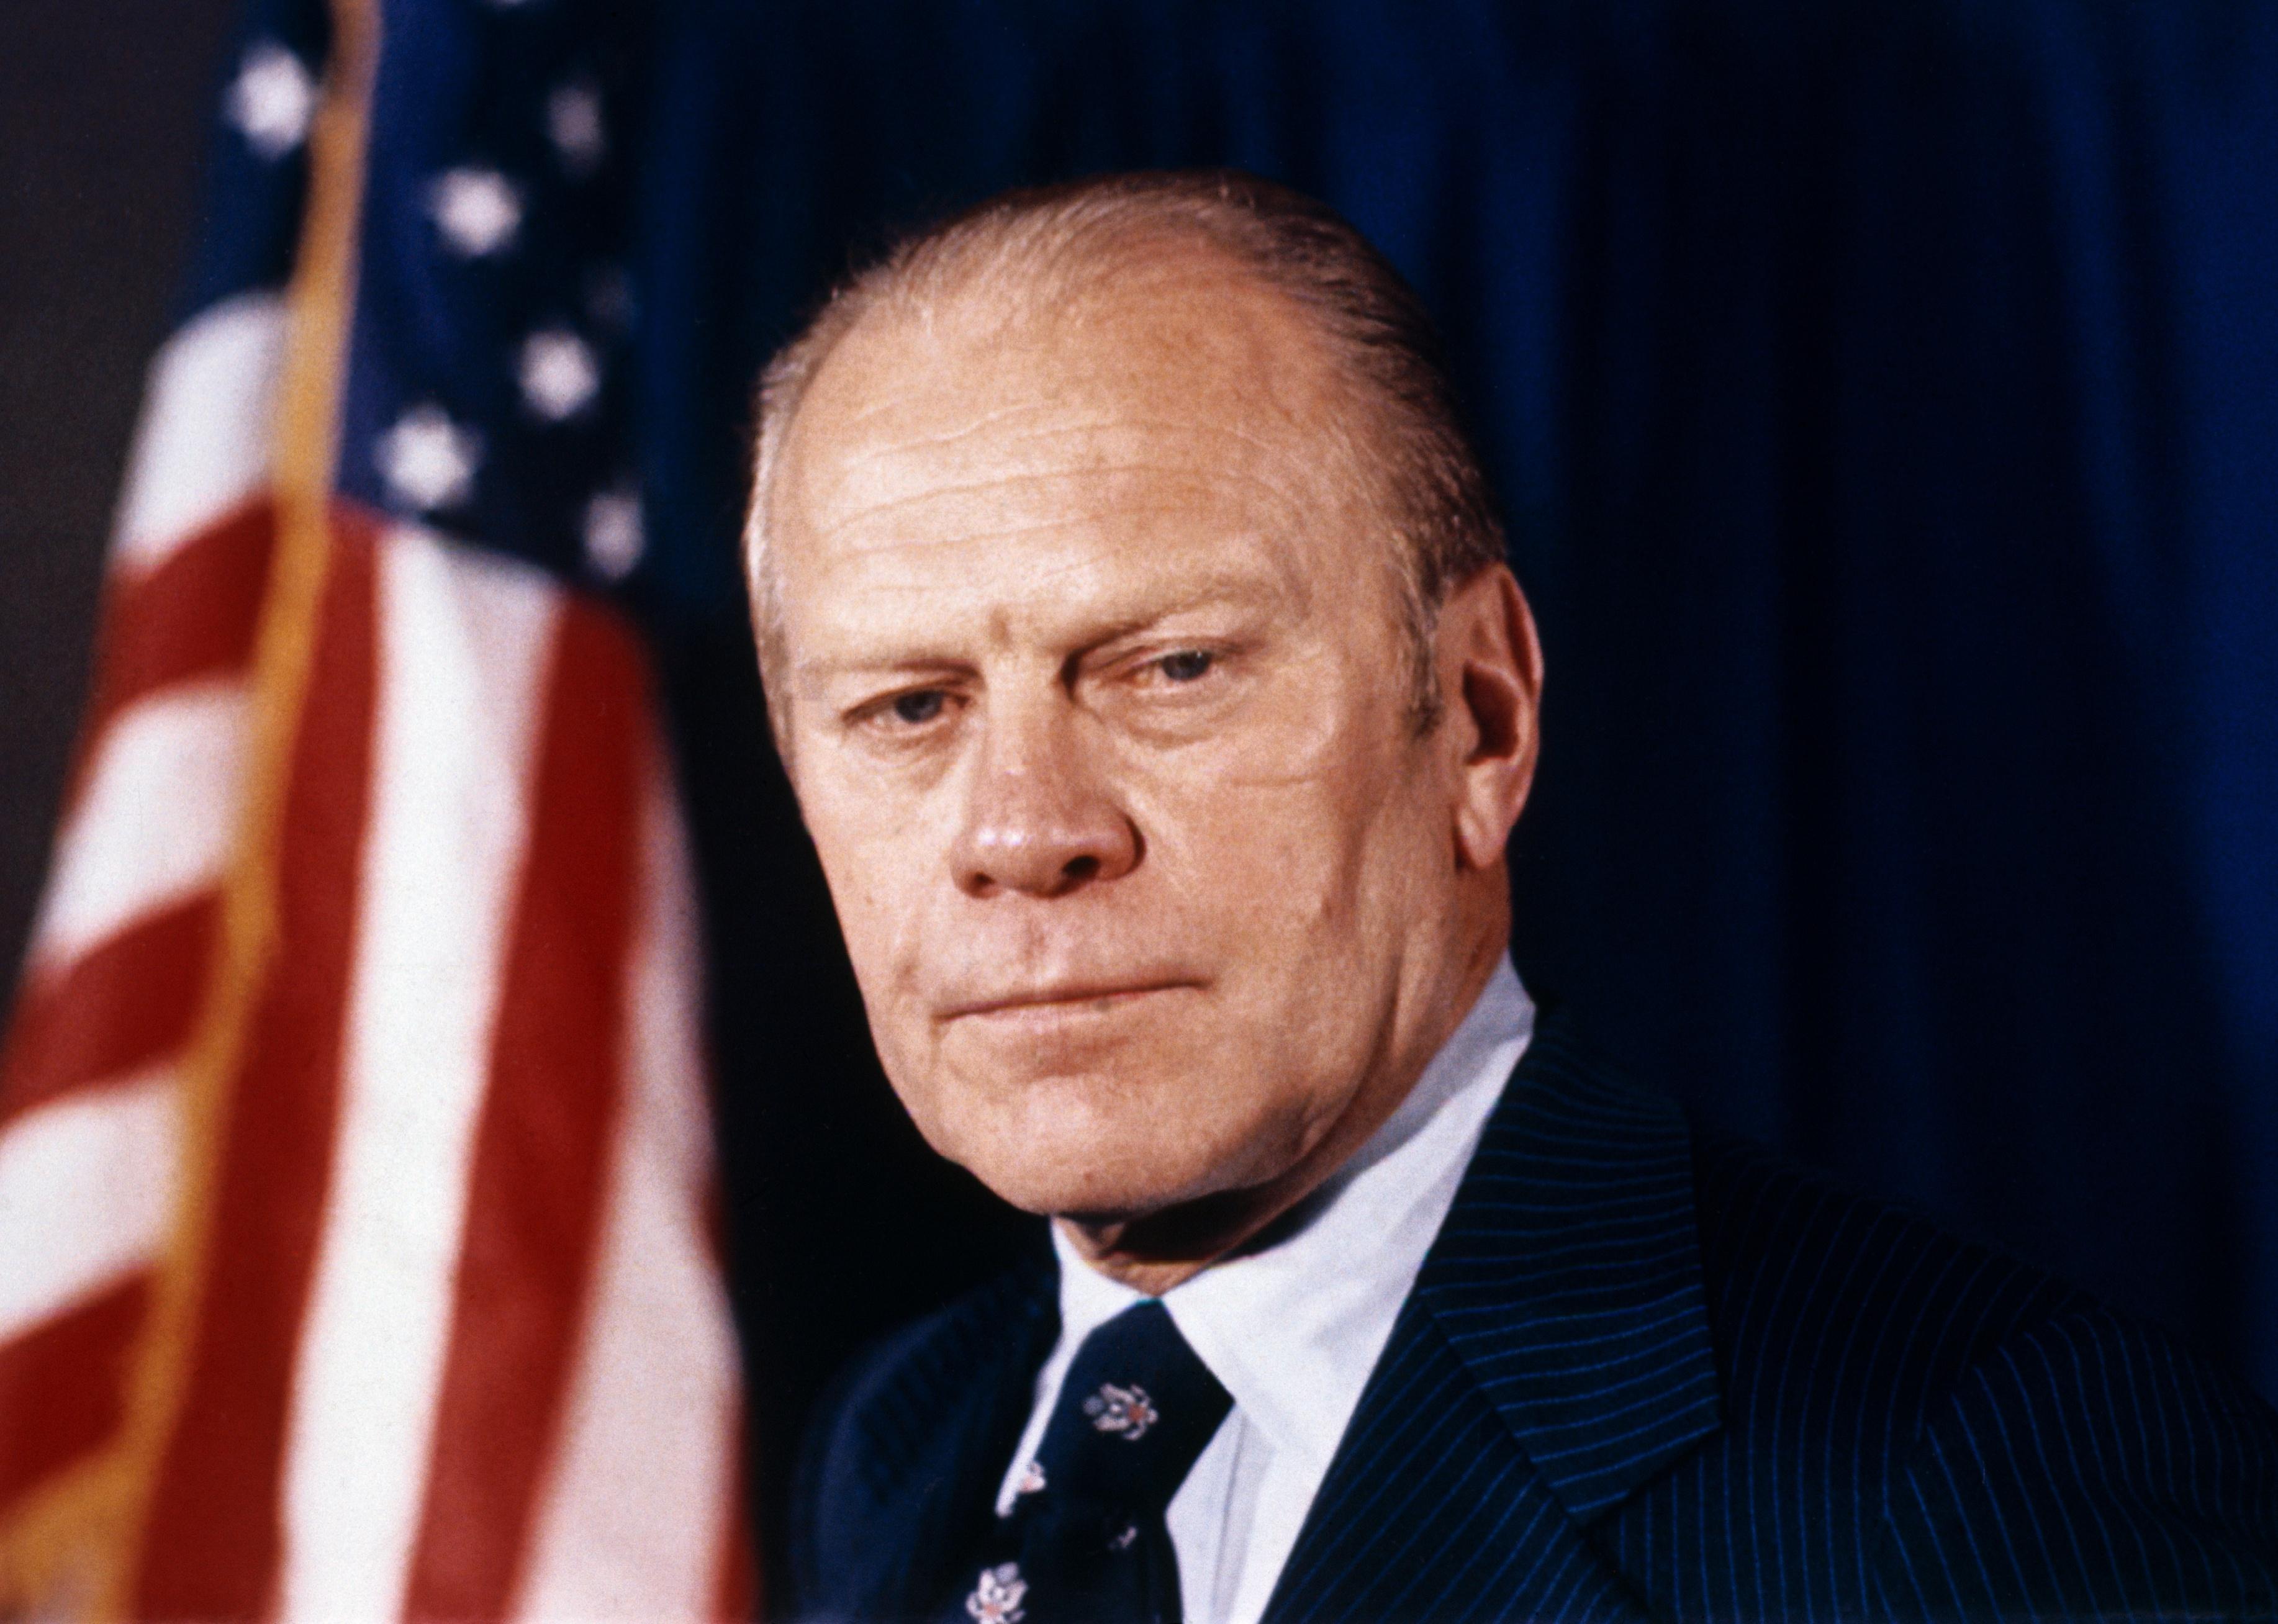 Gerald Ford in a blue pinstripe suit in front of an American flag.